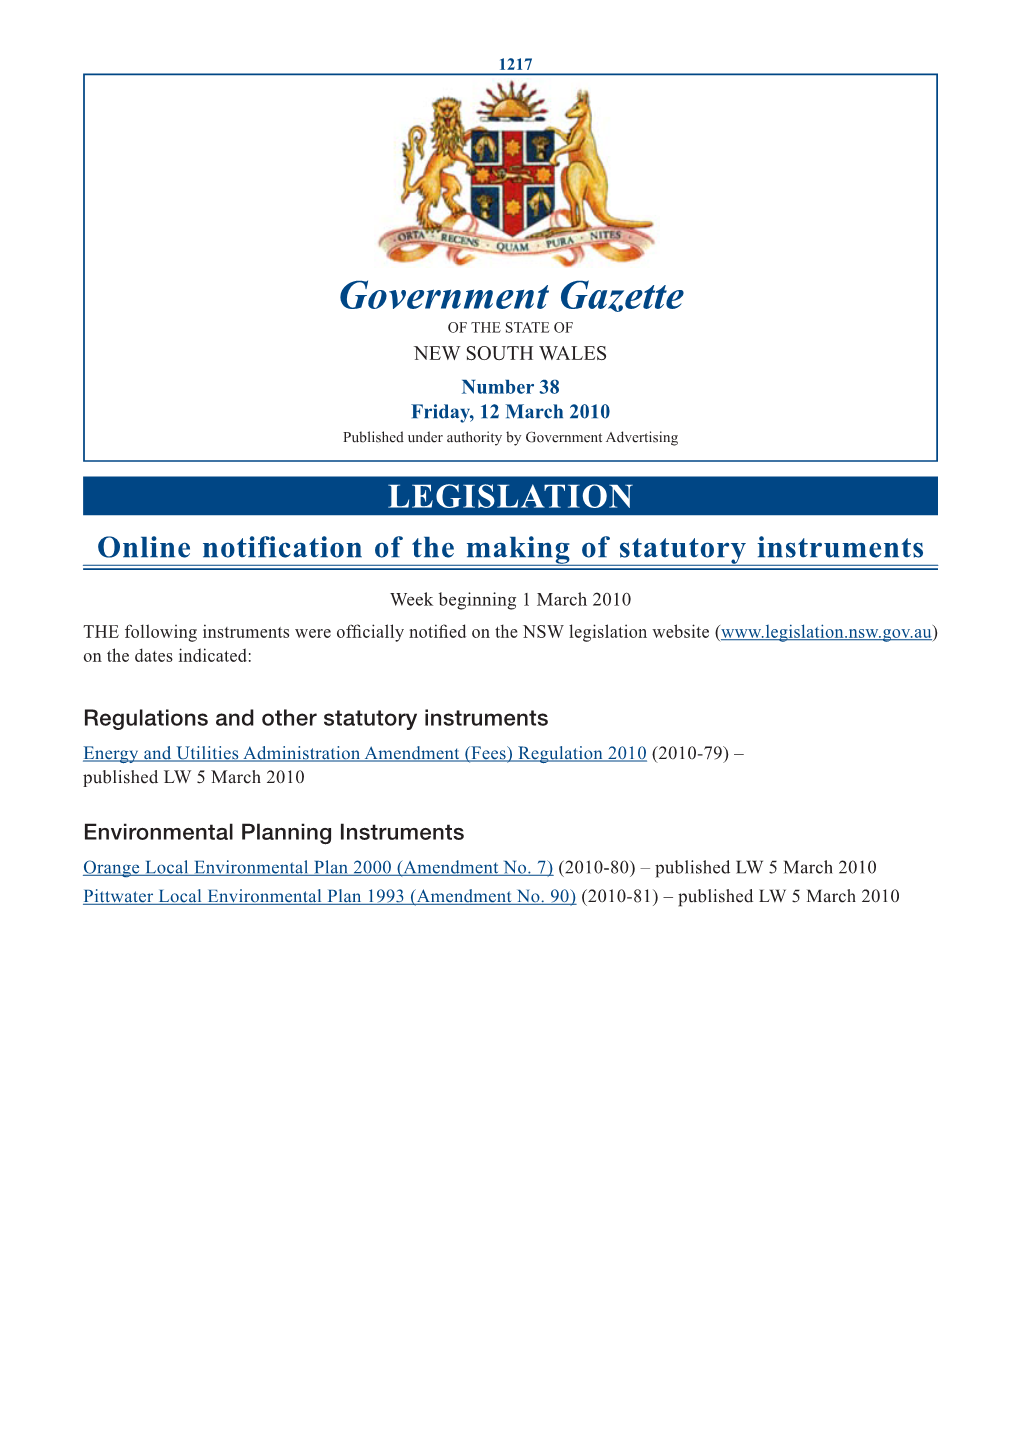 Government Gazette of the STATE of NEW SOUTH WALES Number 38 Friday, 12 March 2010 Published Under Authority by Government Advertising